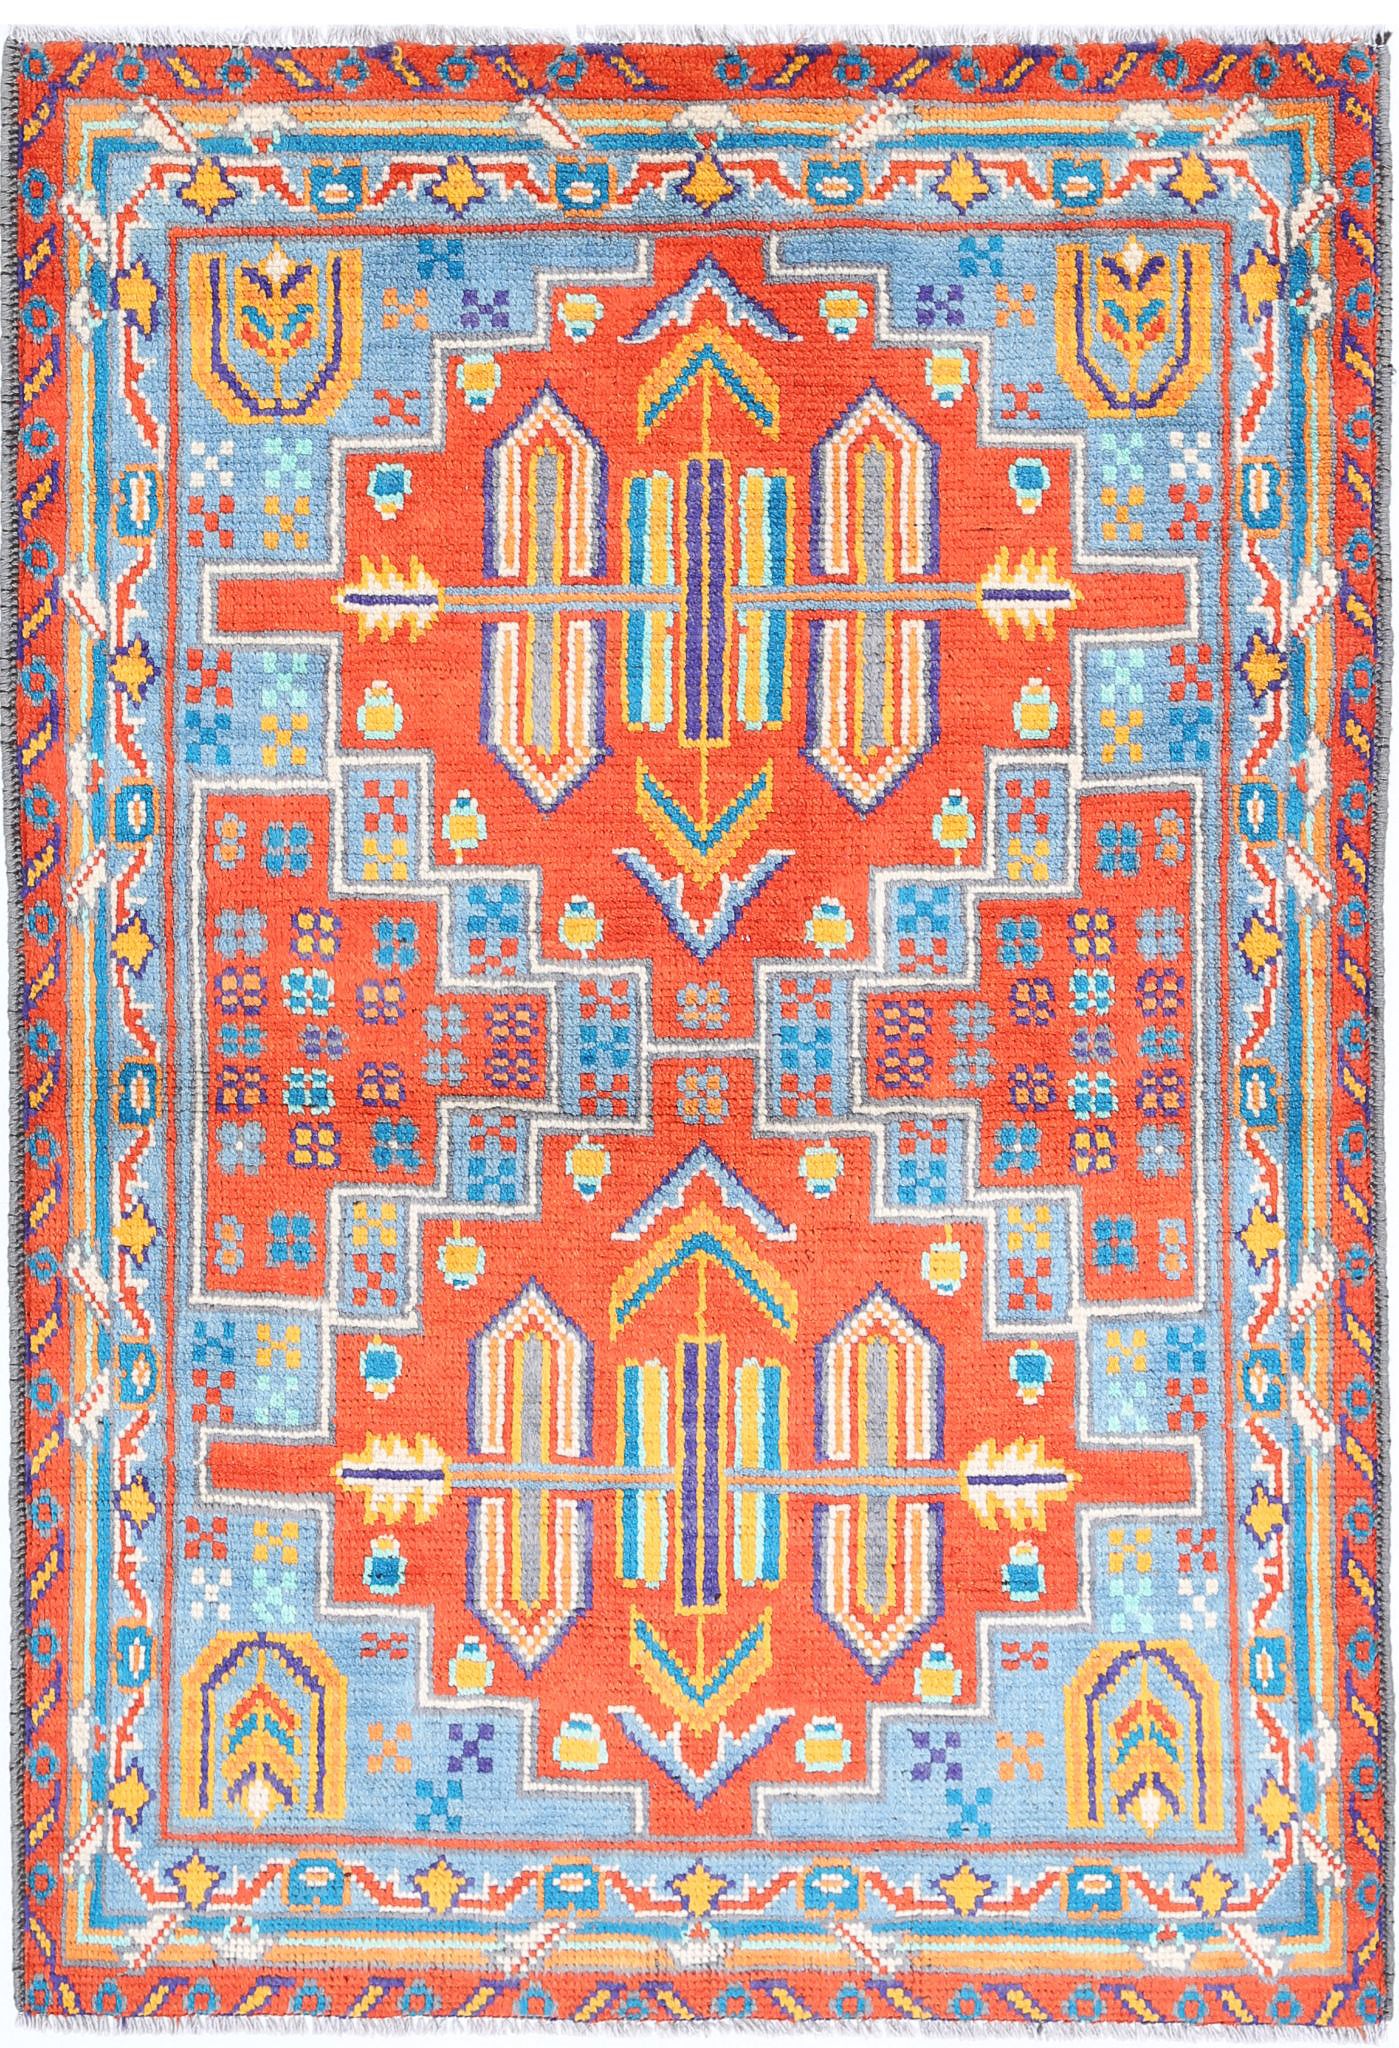 Revival-hand-knotted-qarghani-wool-rug-5014062.jpg